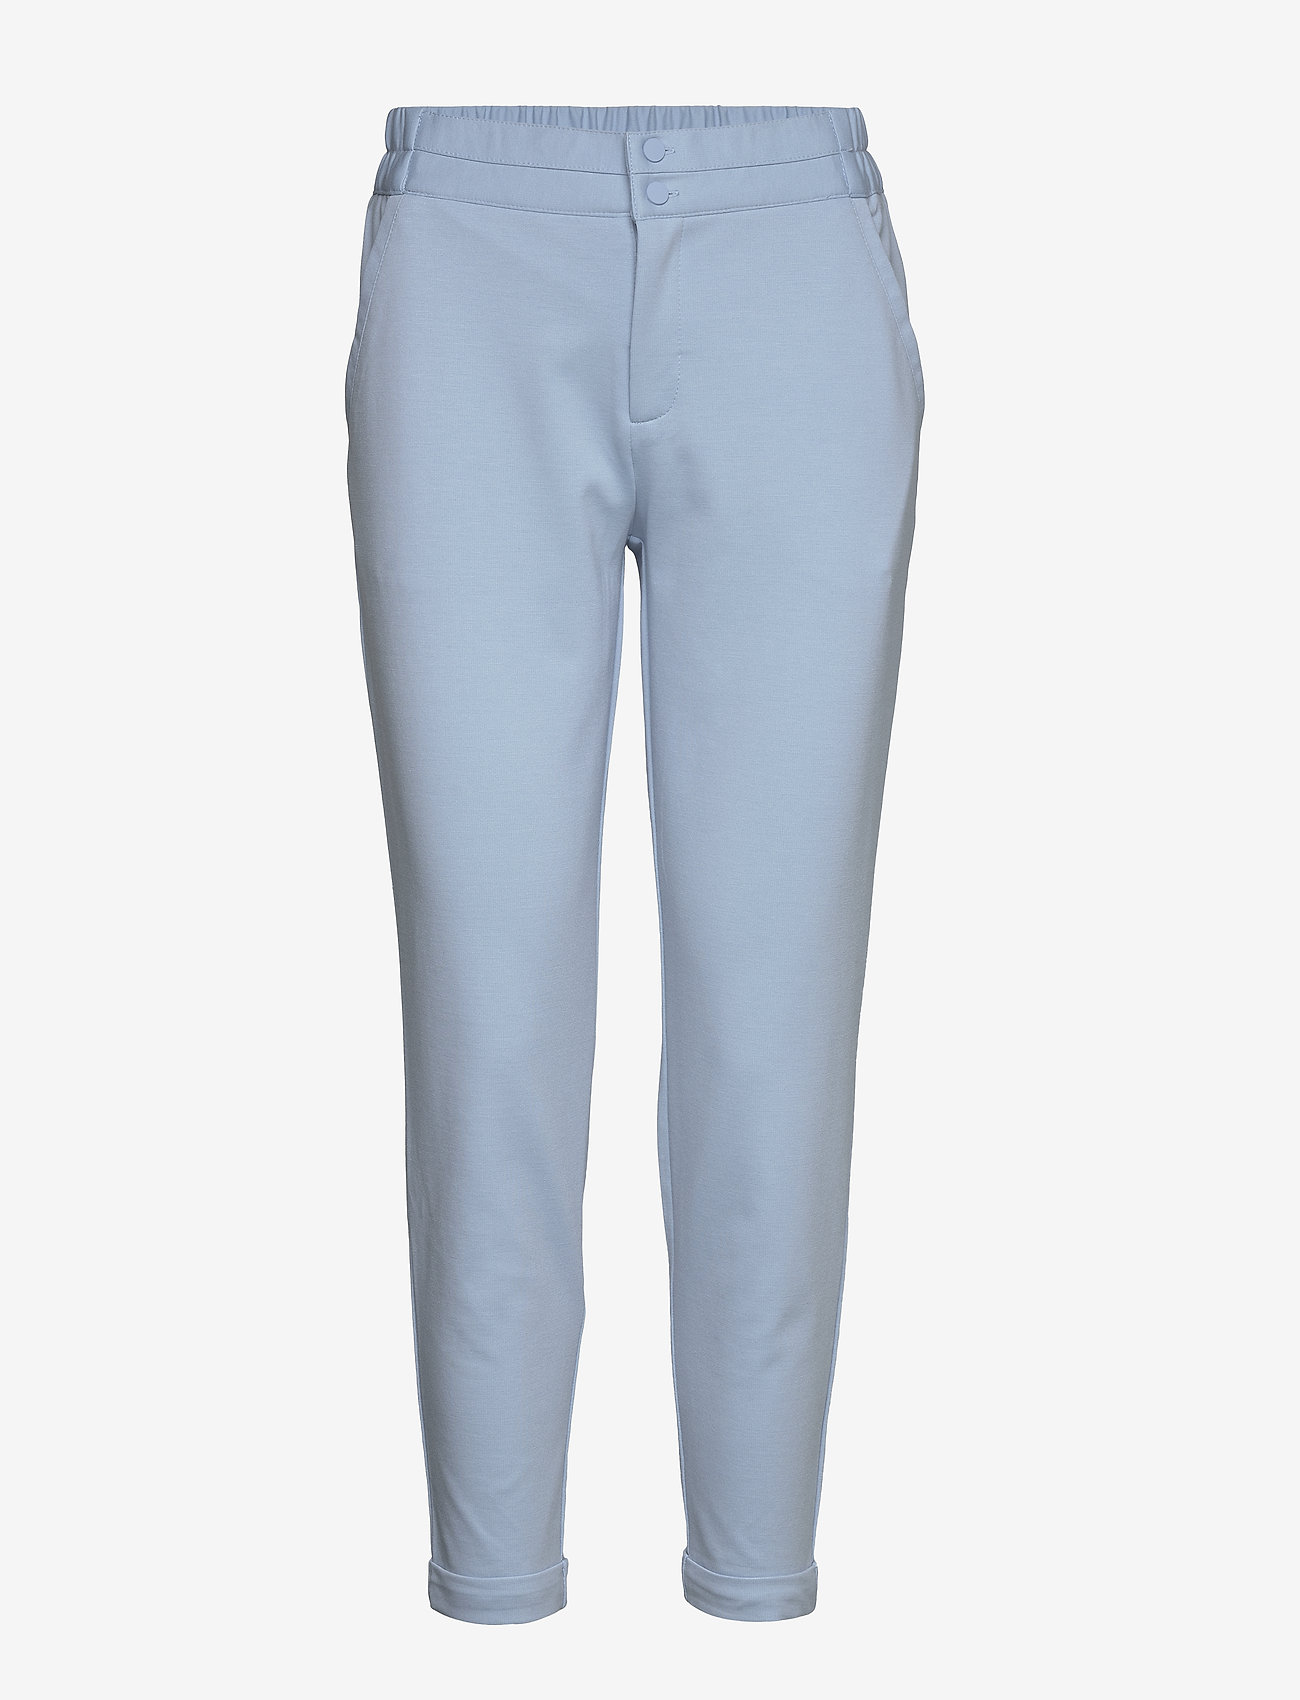 FREE/QUENT - FQNANNI-ANKLE-PA - joggers - chambray blue 15-4030 tcx - 0